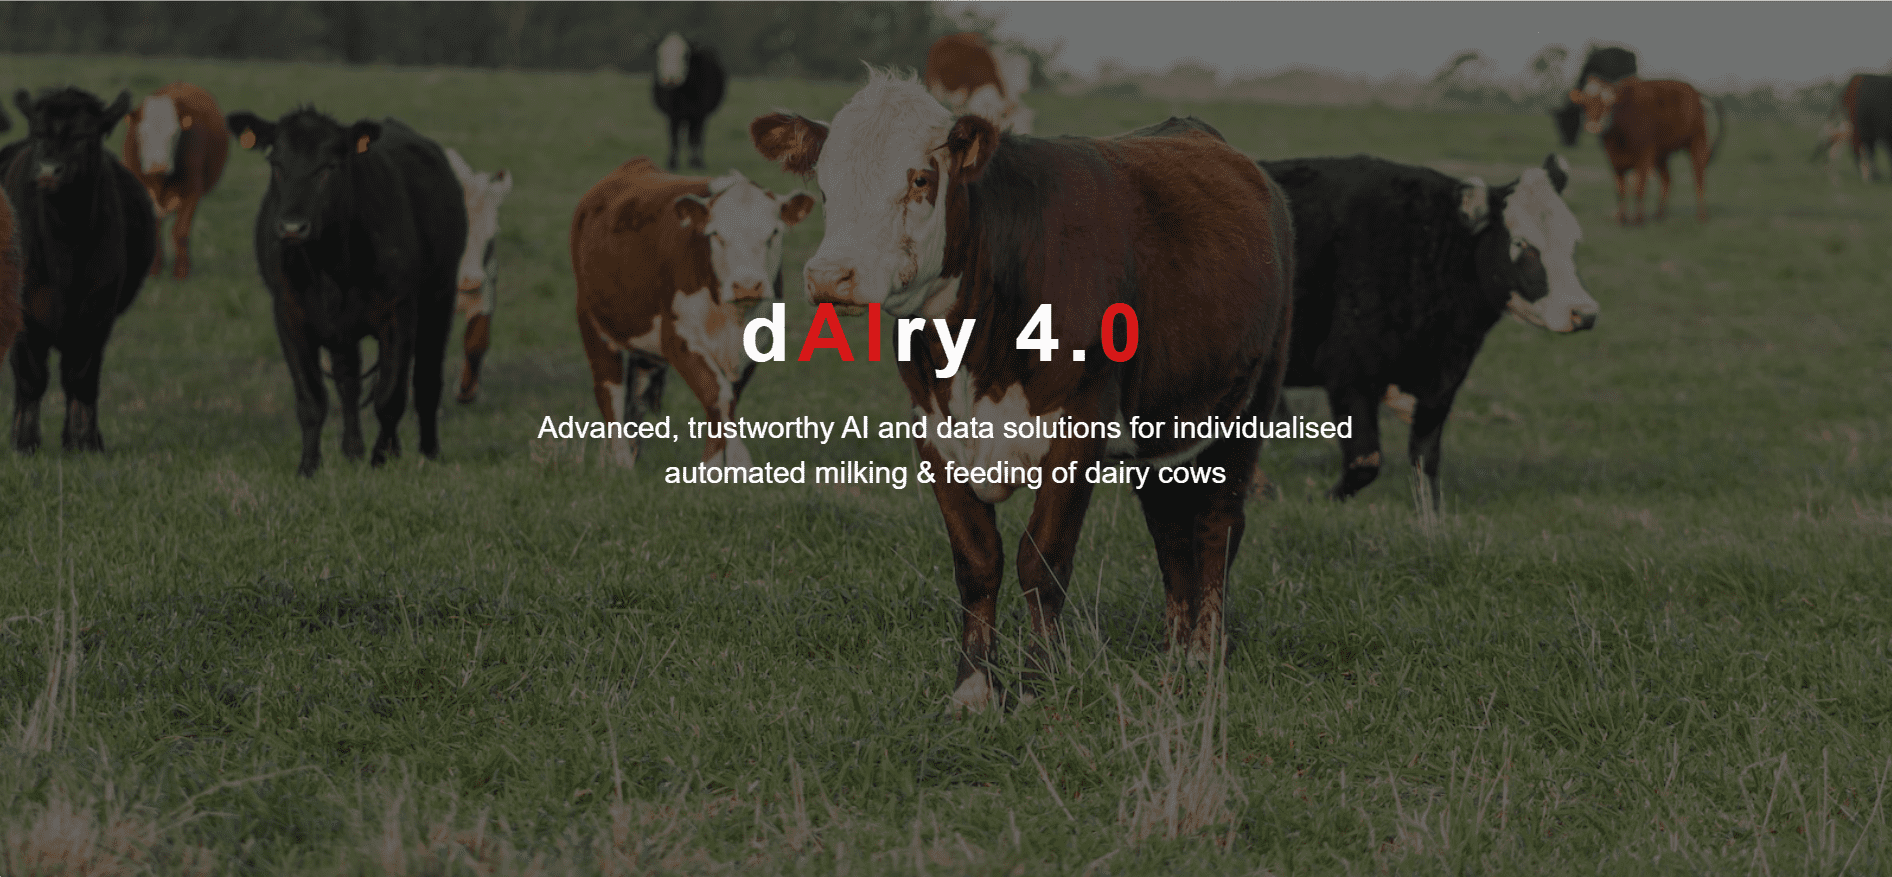 dAIry 4.0 project – AI and data solutions for individualised automated milking & feeding of dairy cows